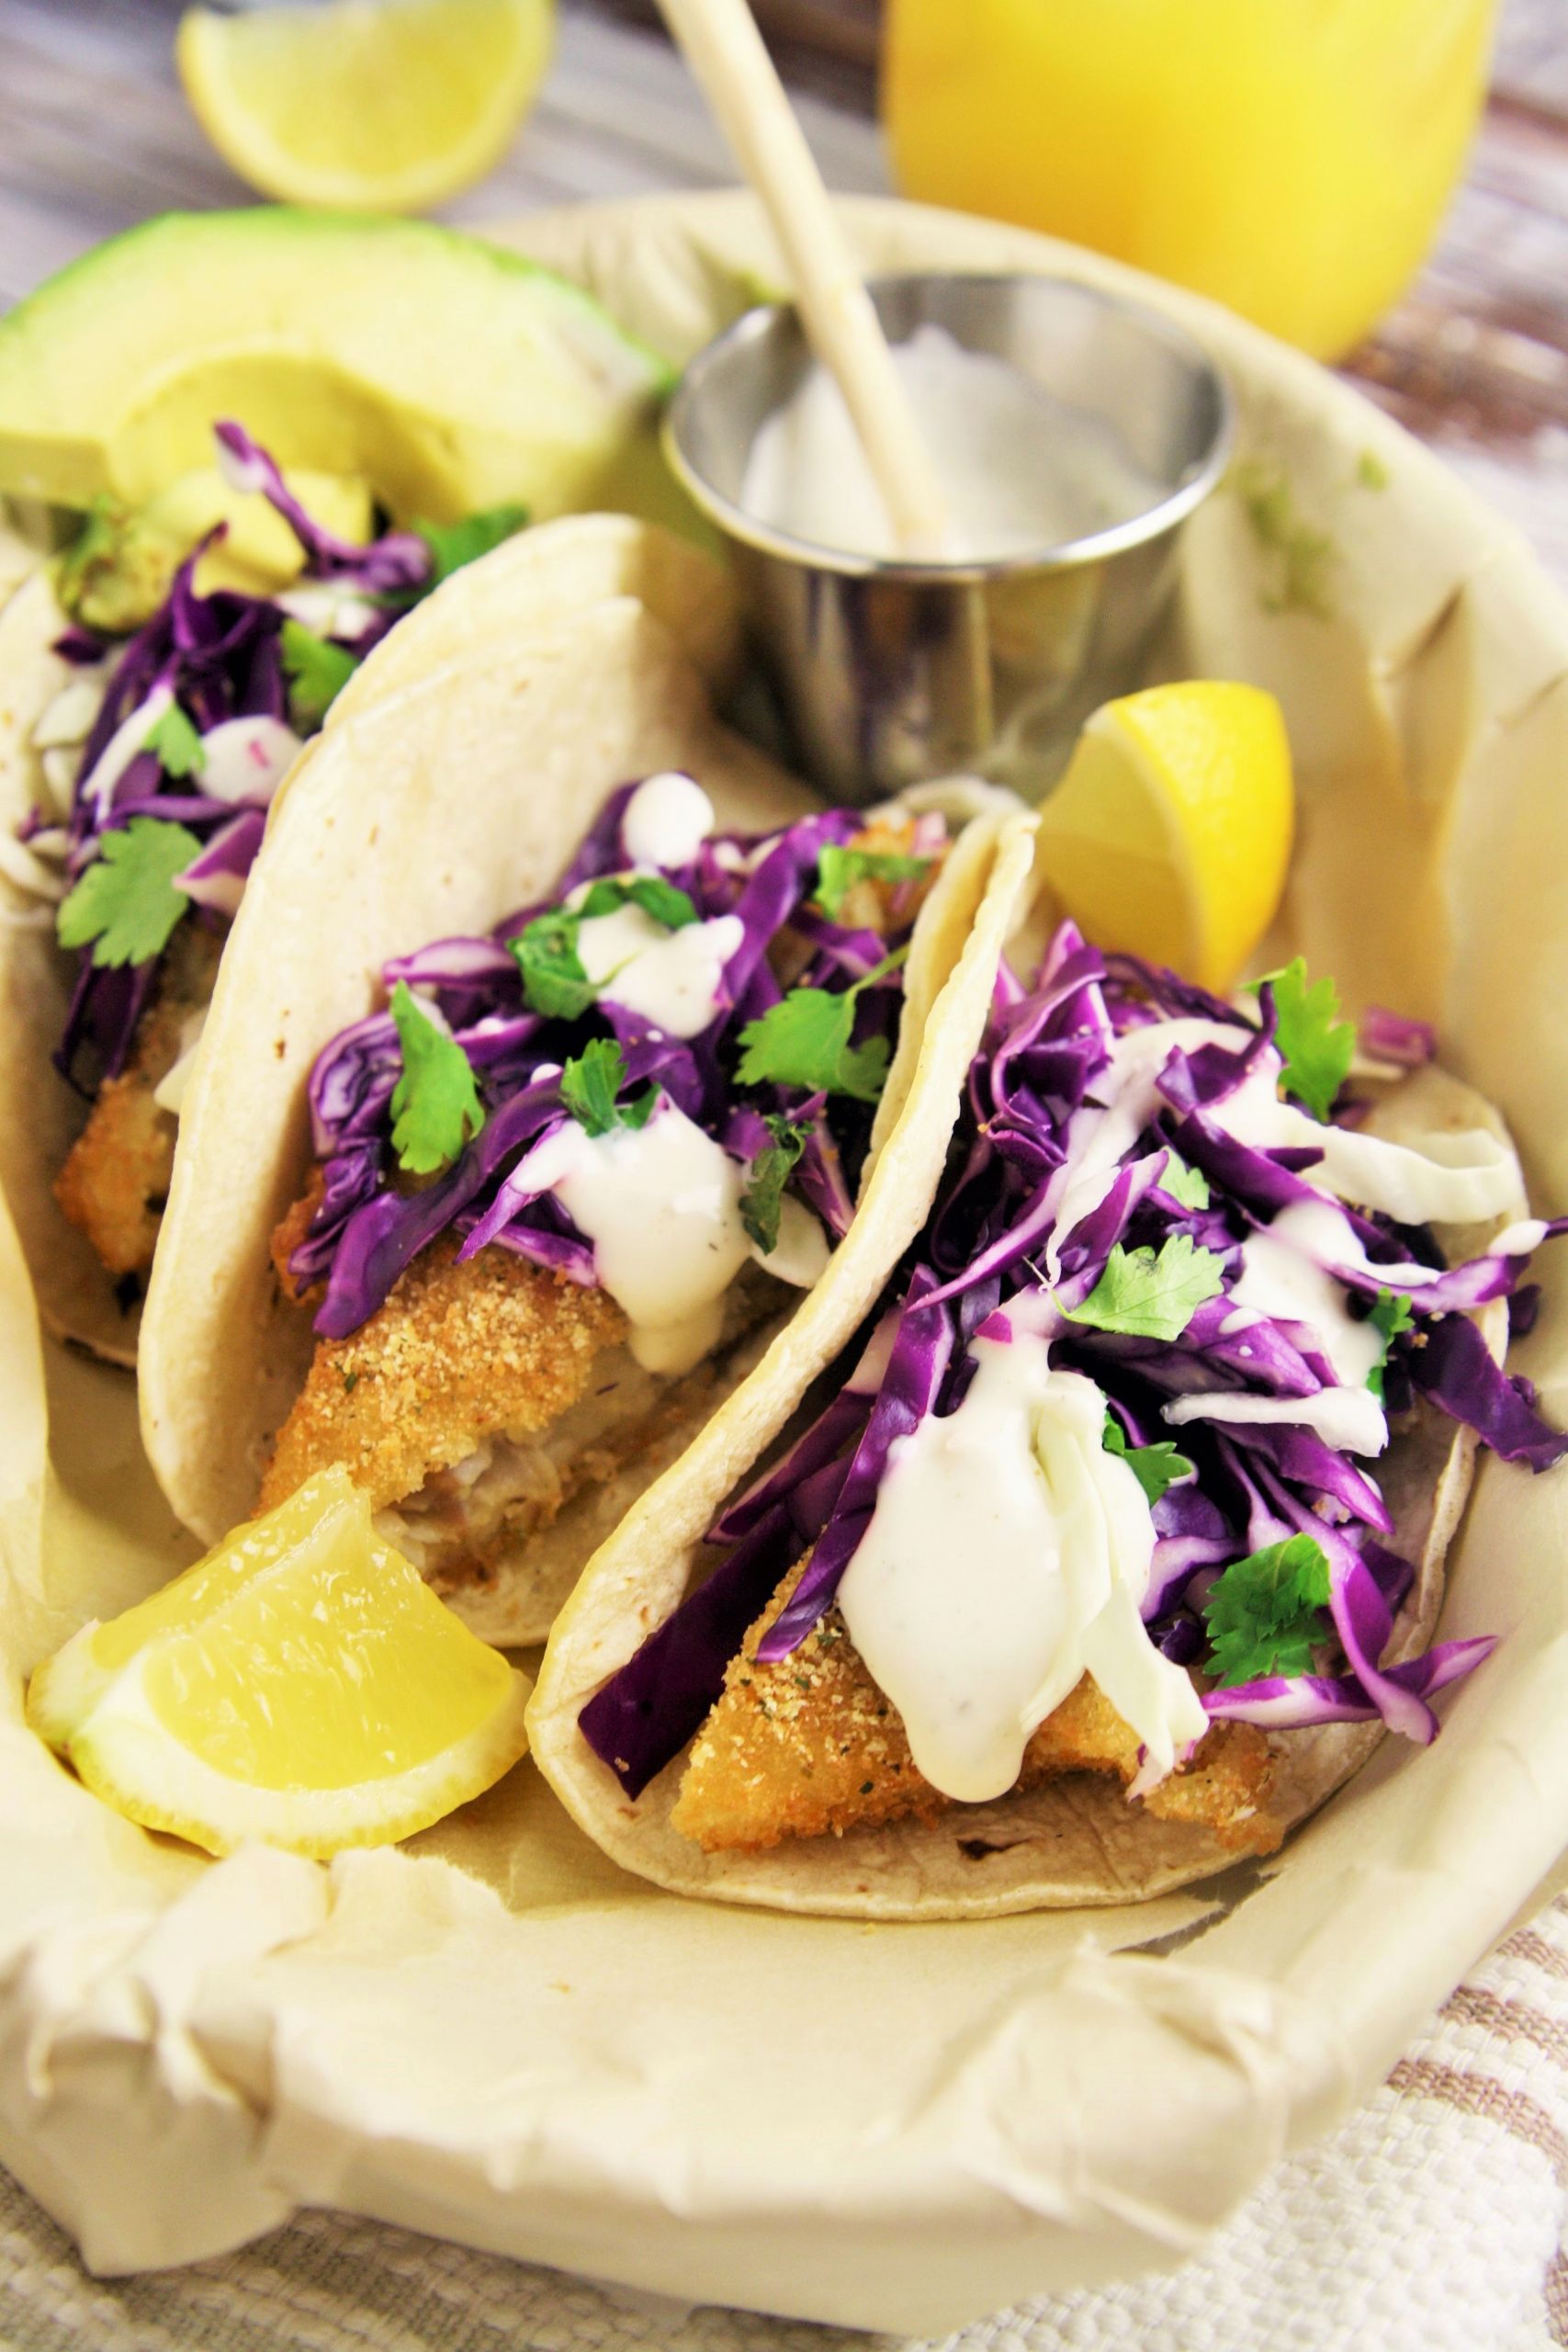 Best Fish Tacos with Cabbage – Easy Recipes To Make at Home